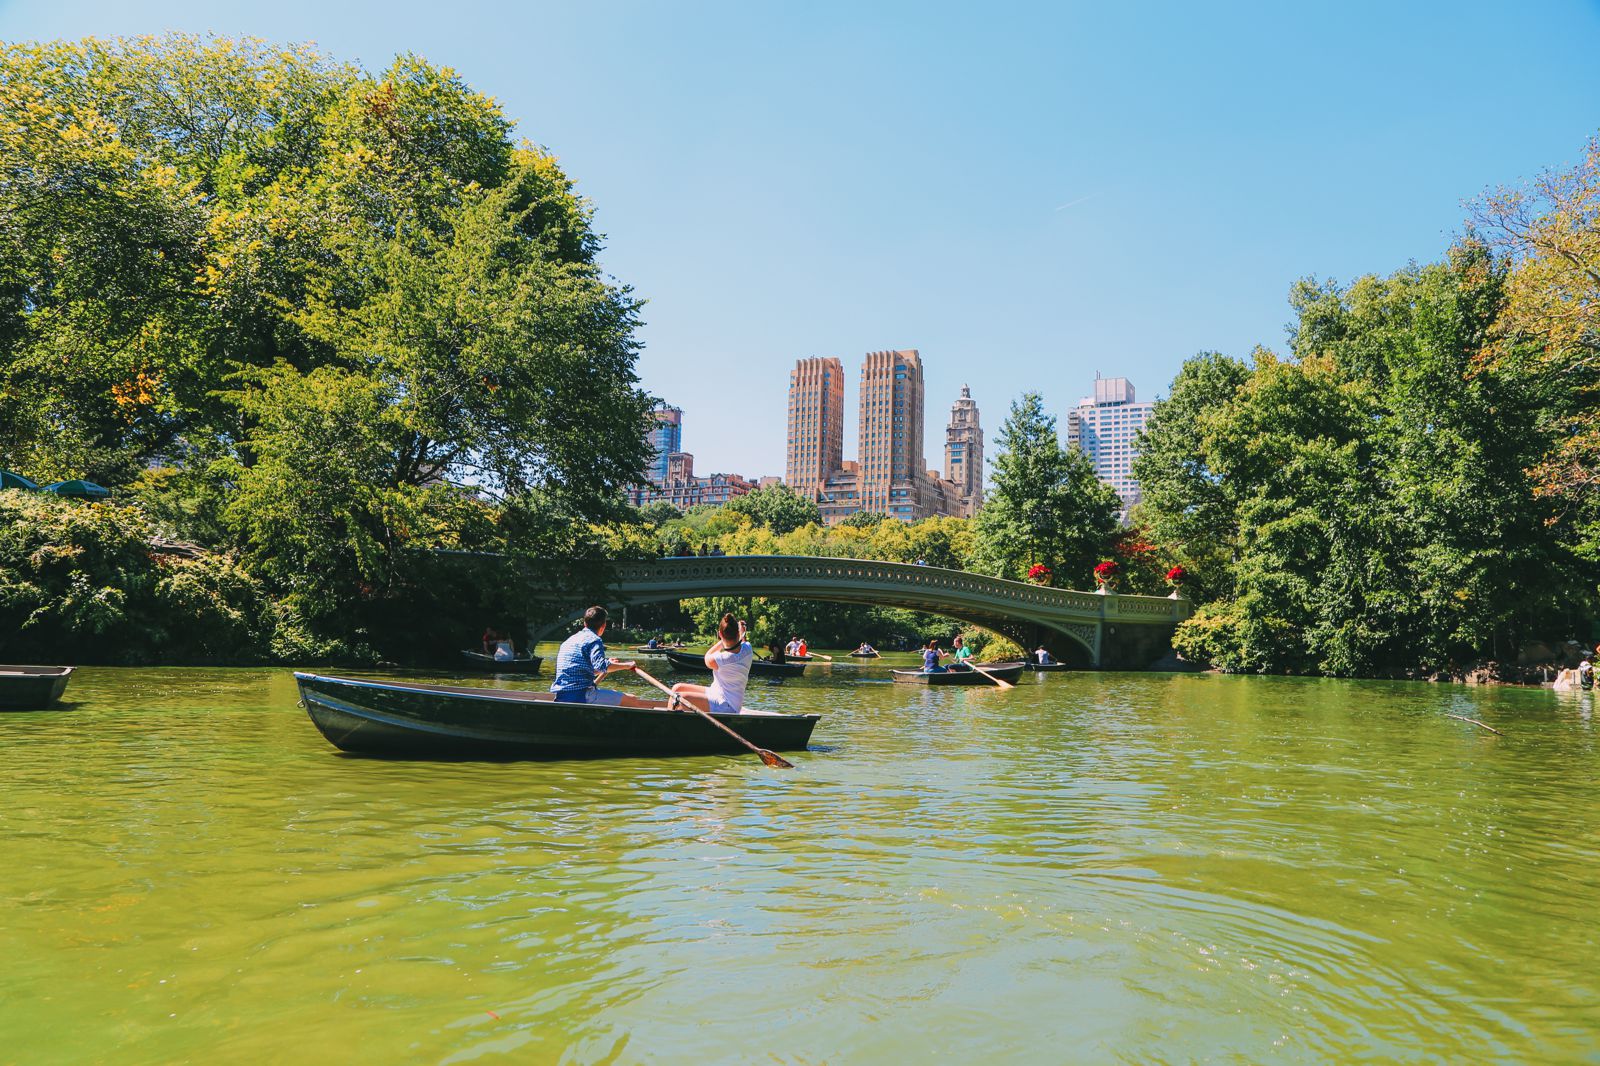 Boating at the Loeb Boathouse in Central Park, New York City (22)